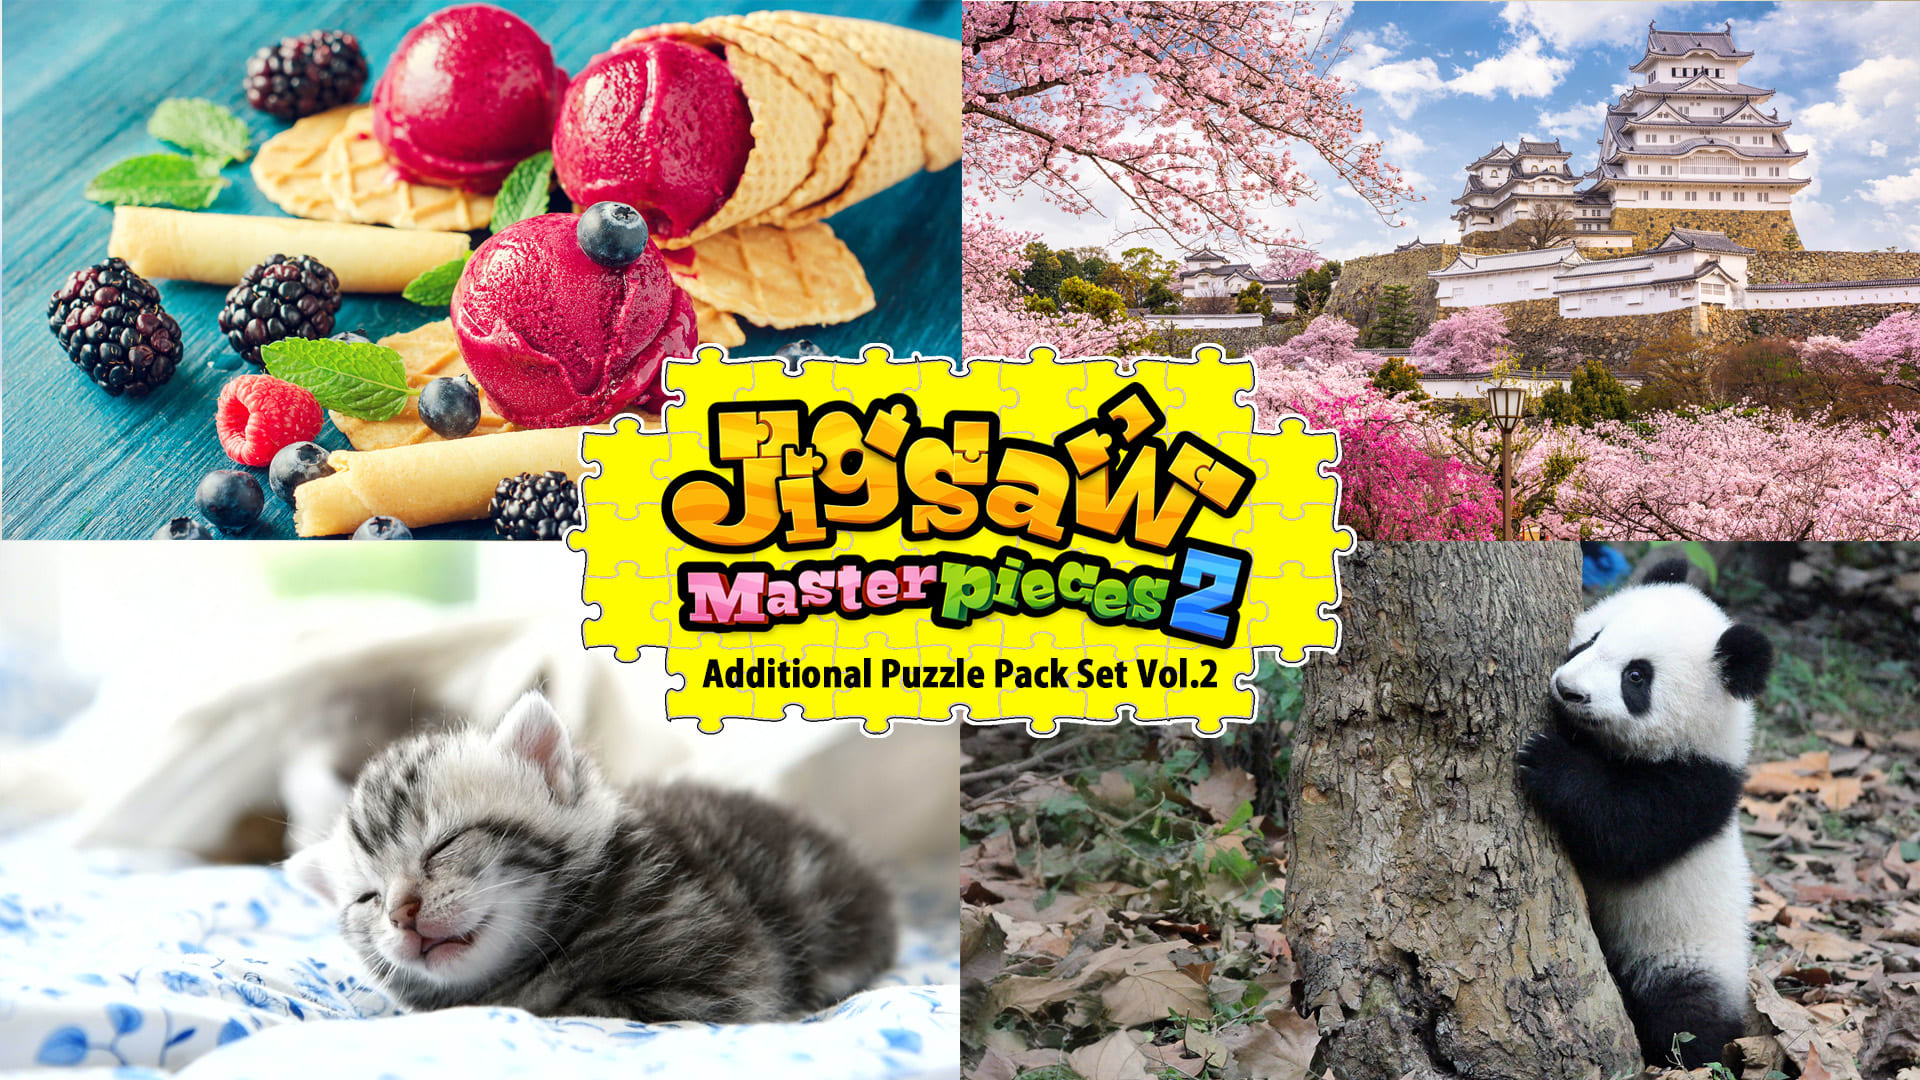 Additional Puzzle Pack Set Vol.2